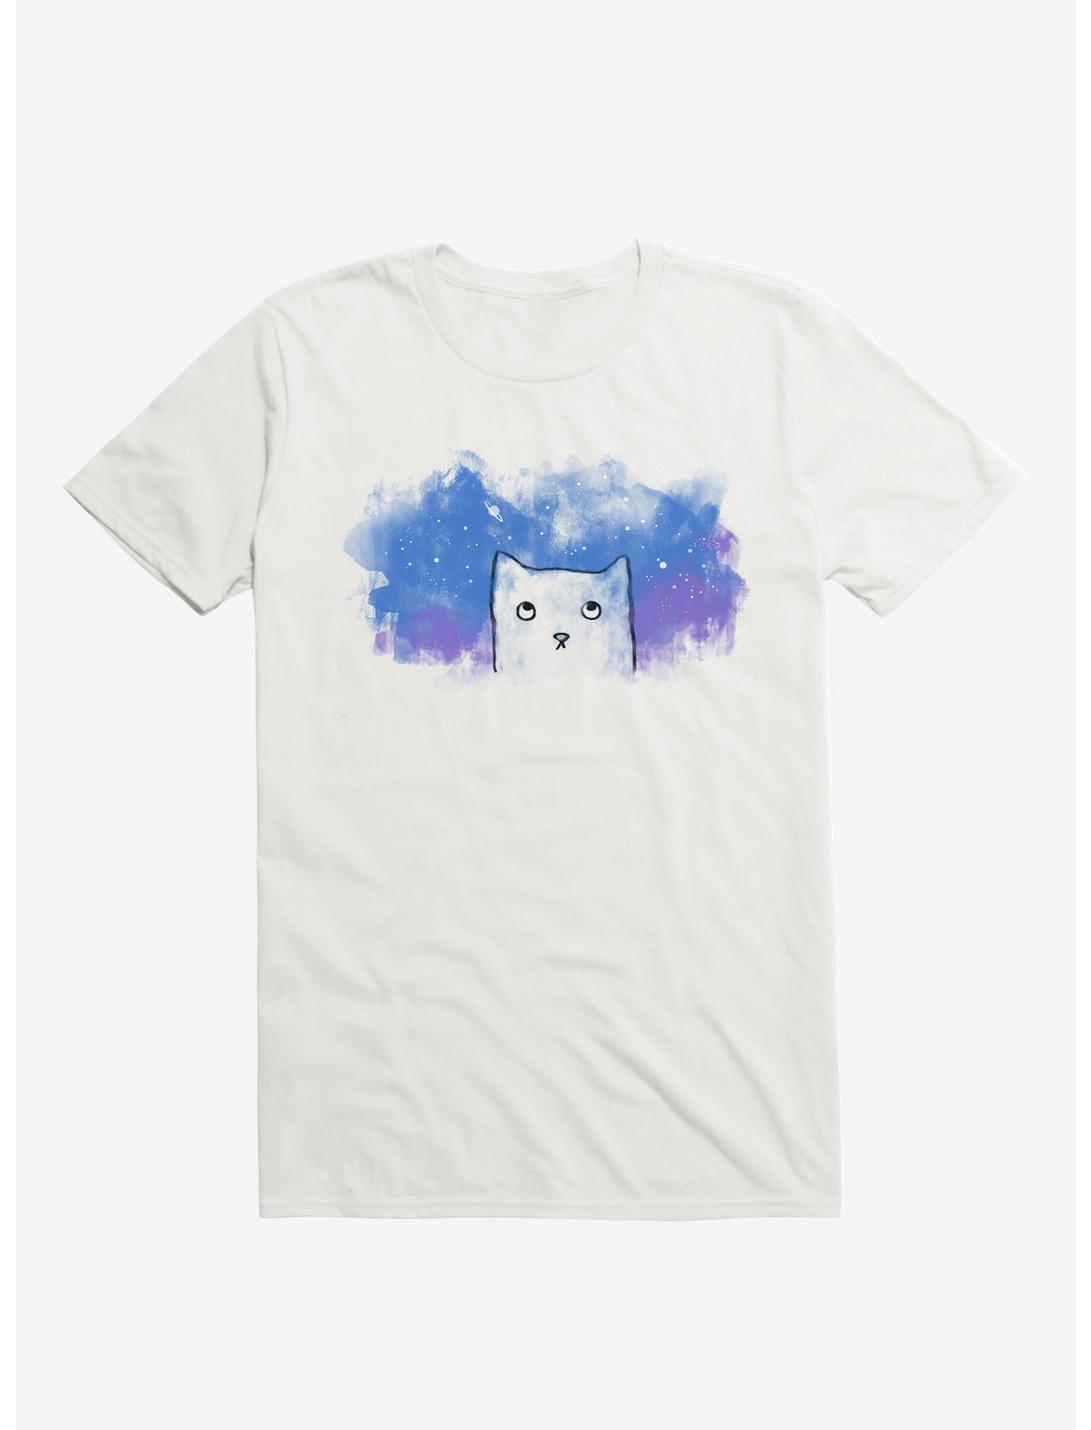 Spacing Out T-Shirt, WHITE, hi-res